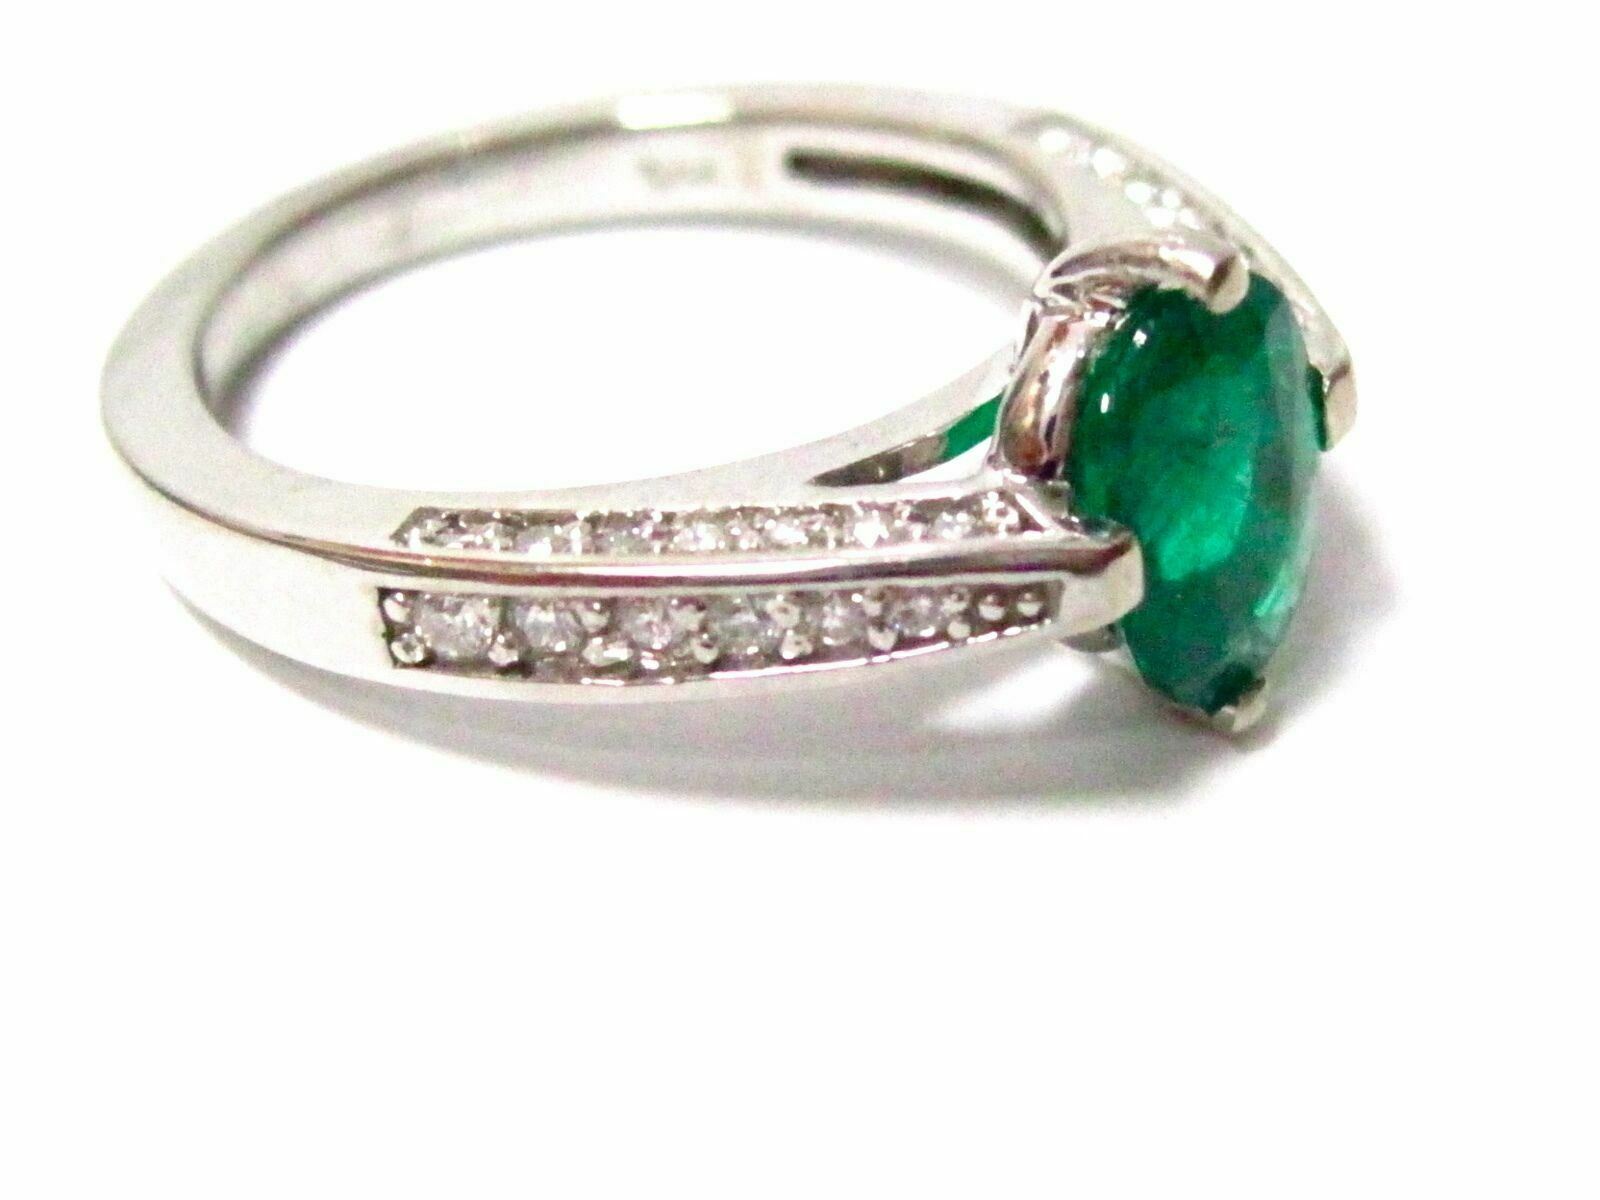 1.54 TCW Columbian Oval Emerald & Diamond Cocktail Ring Size 7 14k White Gold